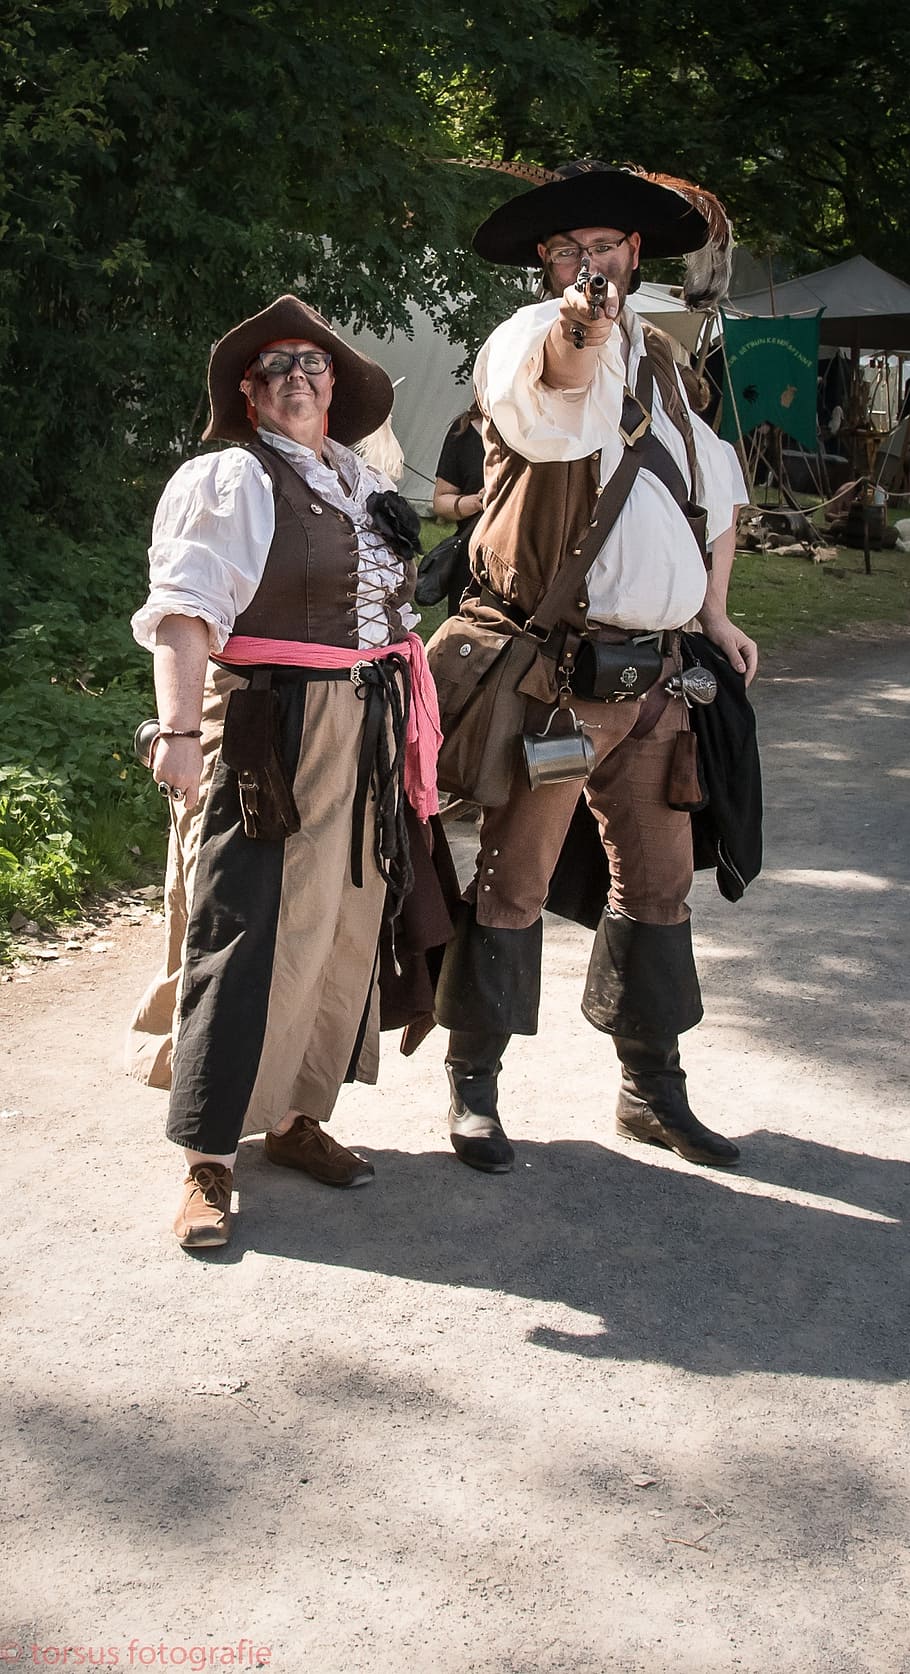 pirates, pistol, role playing game, cultures, people, traditional Clothing, history, full length, real people, sunlight